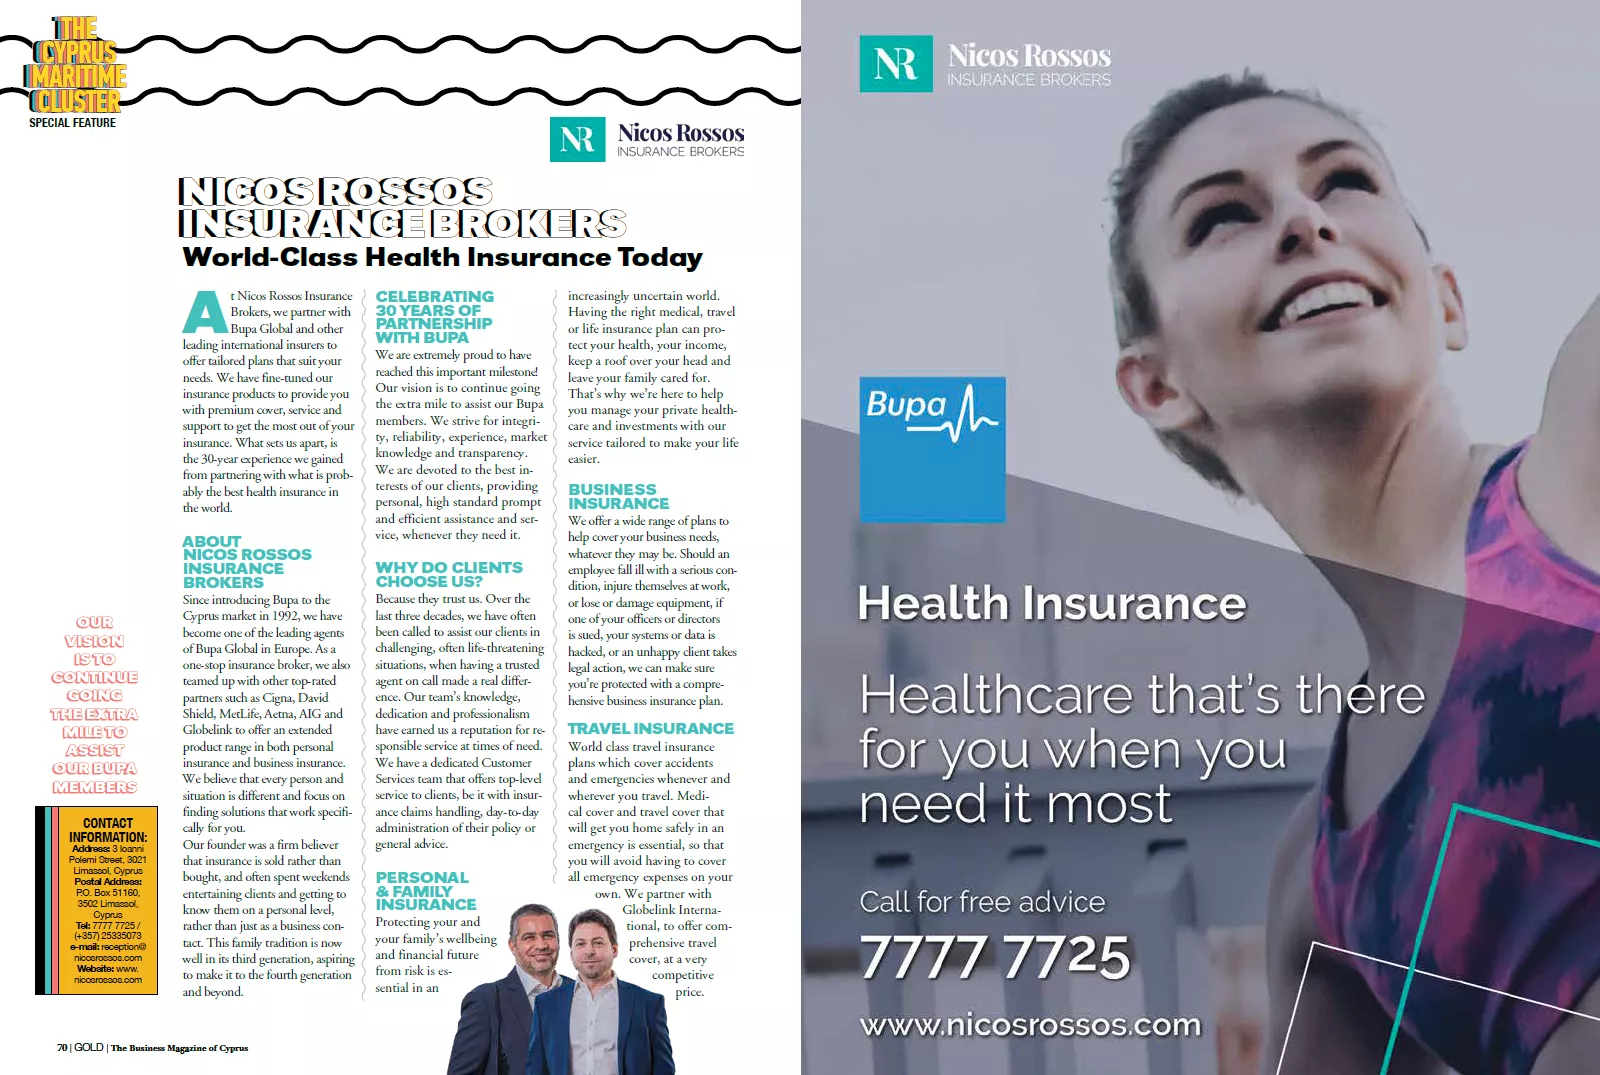 Nicos Rossos Insurance Bokers featured in GOLD Business Magazine.